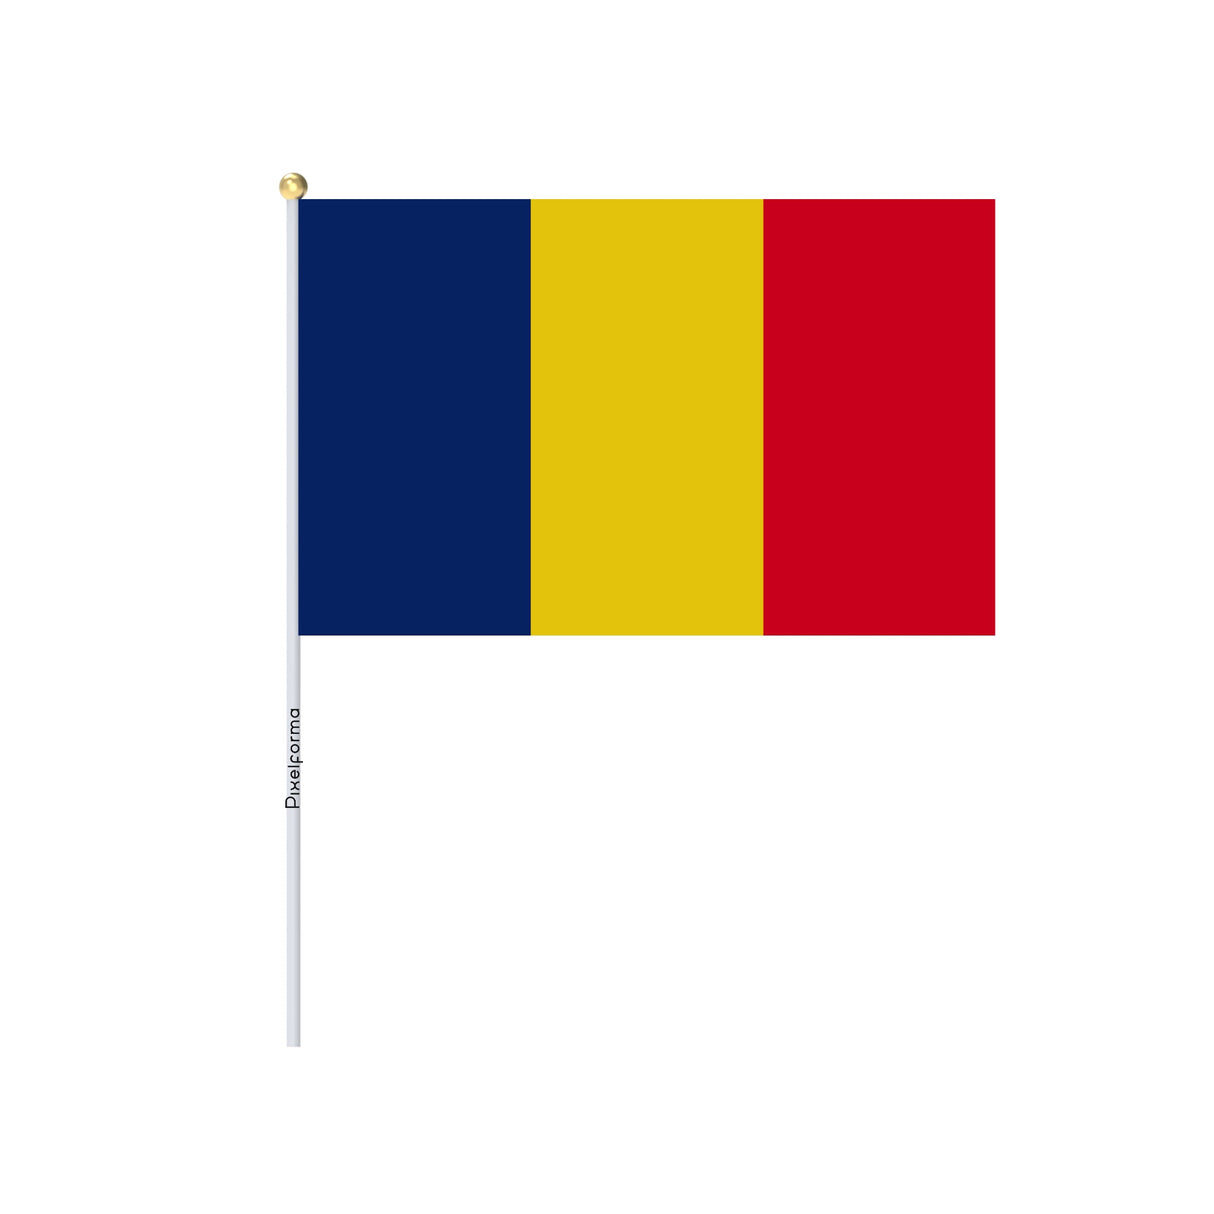 Mini Flag of Chad Bundles in Several Sizes - Pixelforma